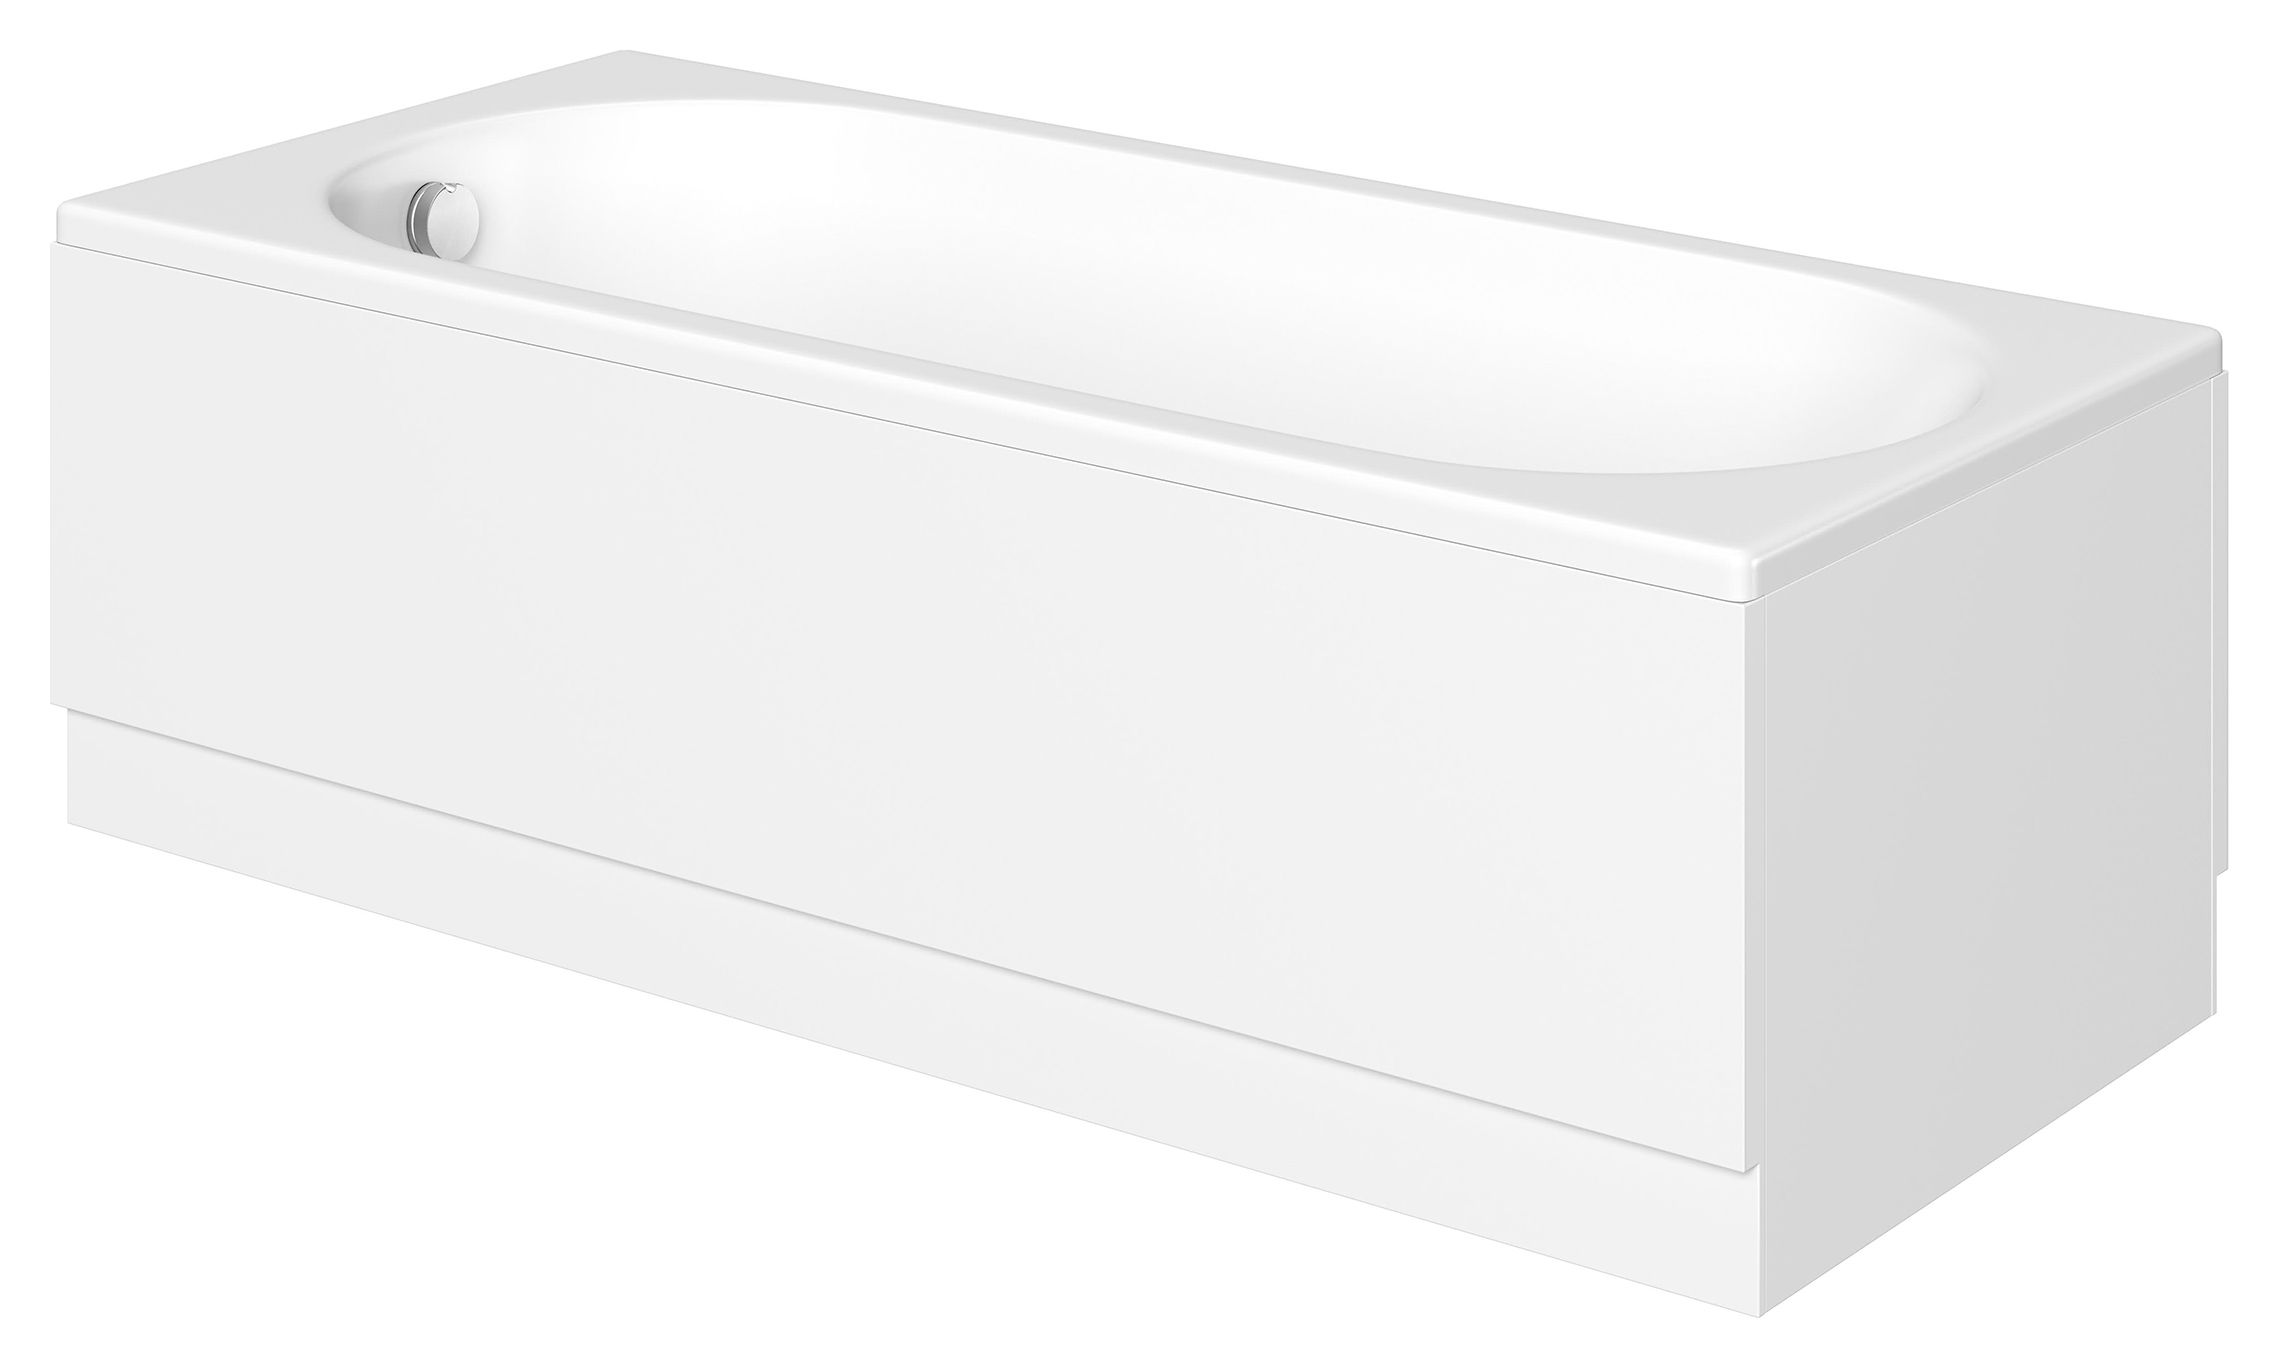 Image of Wickes Forenza Double Ended Bath - 1700 x 700mm